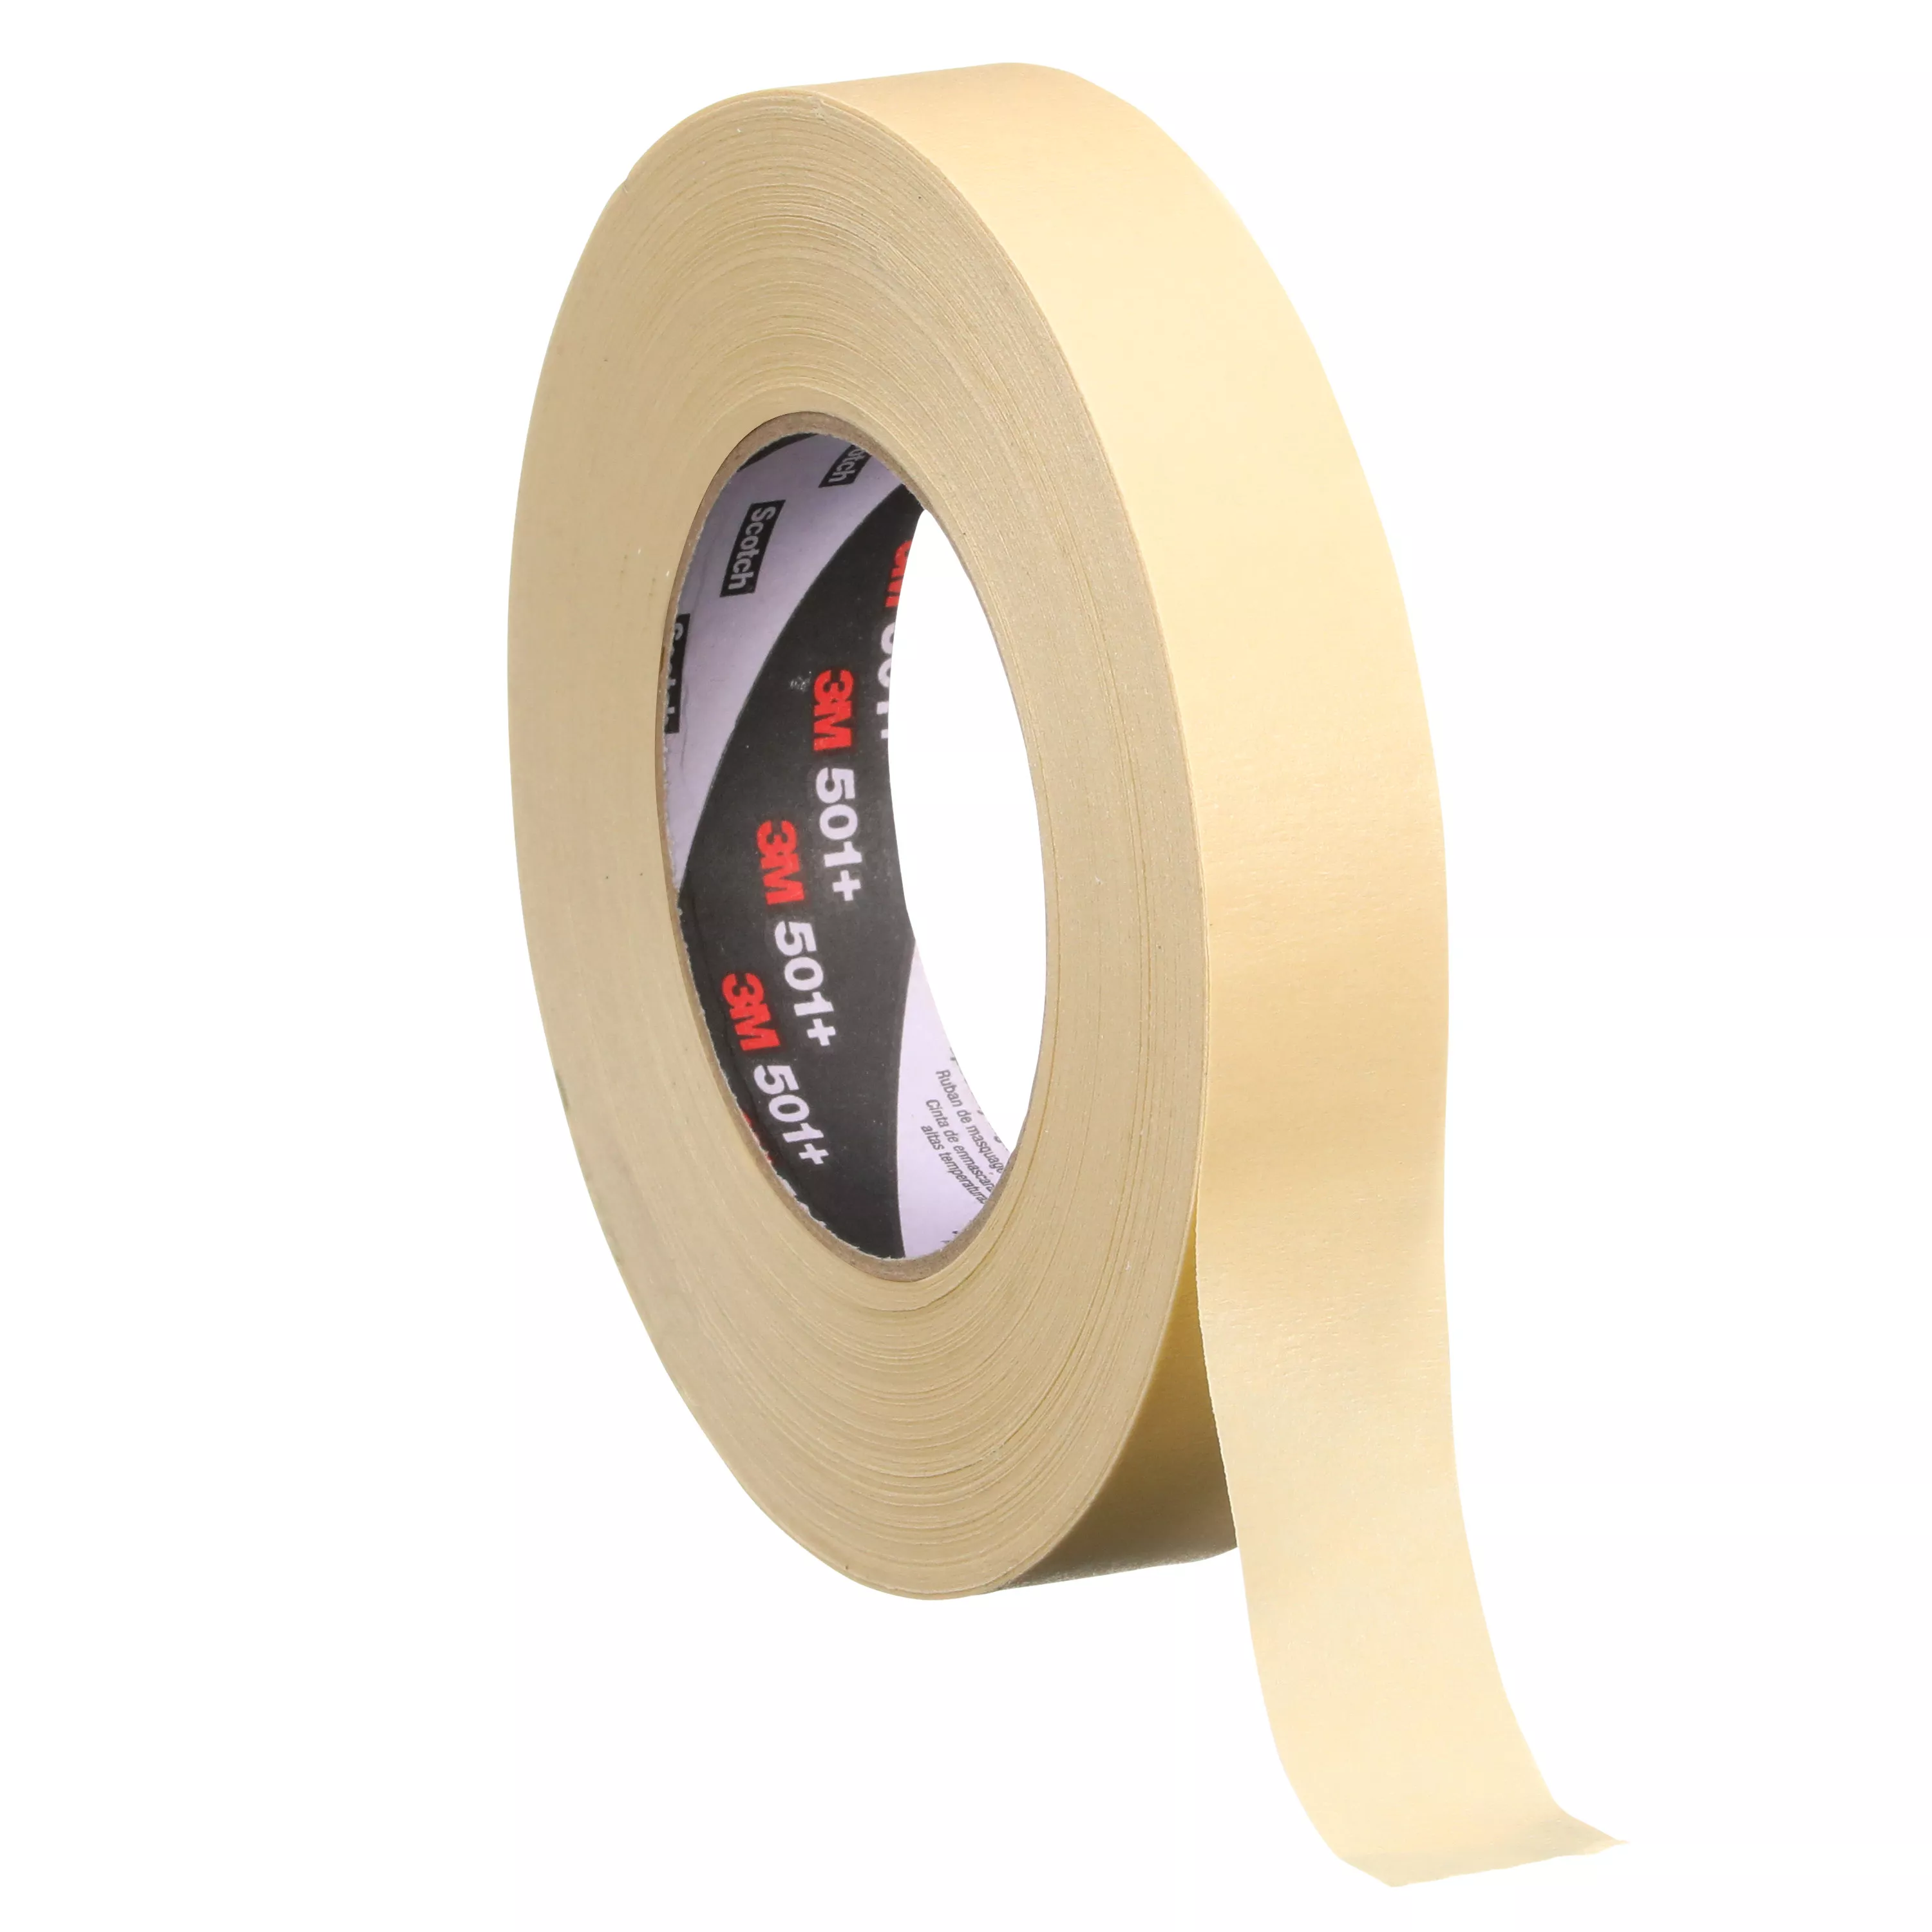 SKU 7000138486 | 3M™ Specialty High Temperature Masking Tape 501+